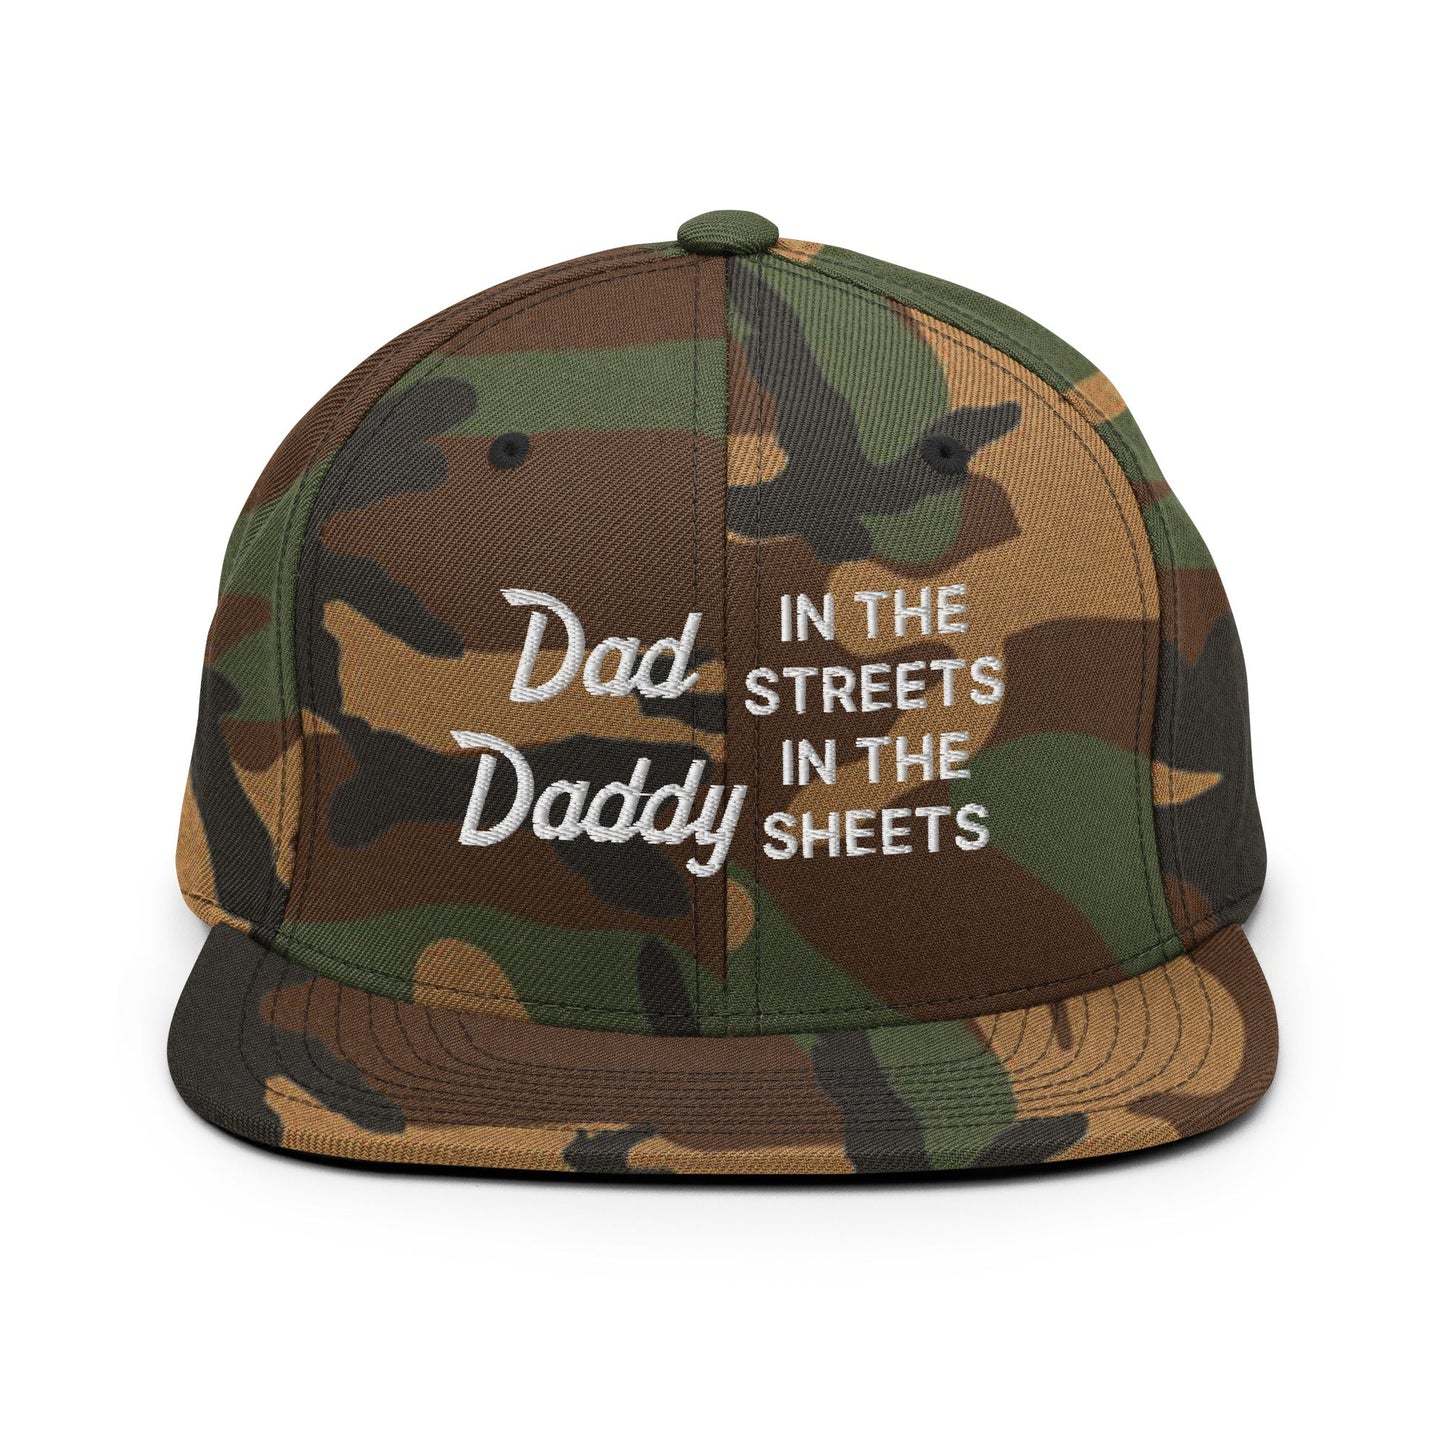 Dad In The Streets Daddy In The Sheets Snapback Hat Green Camo